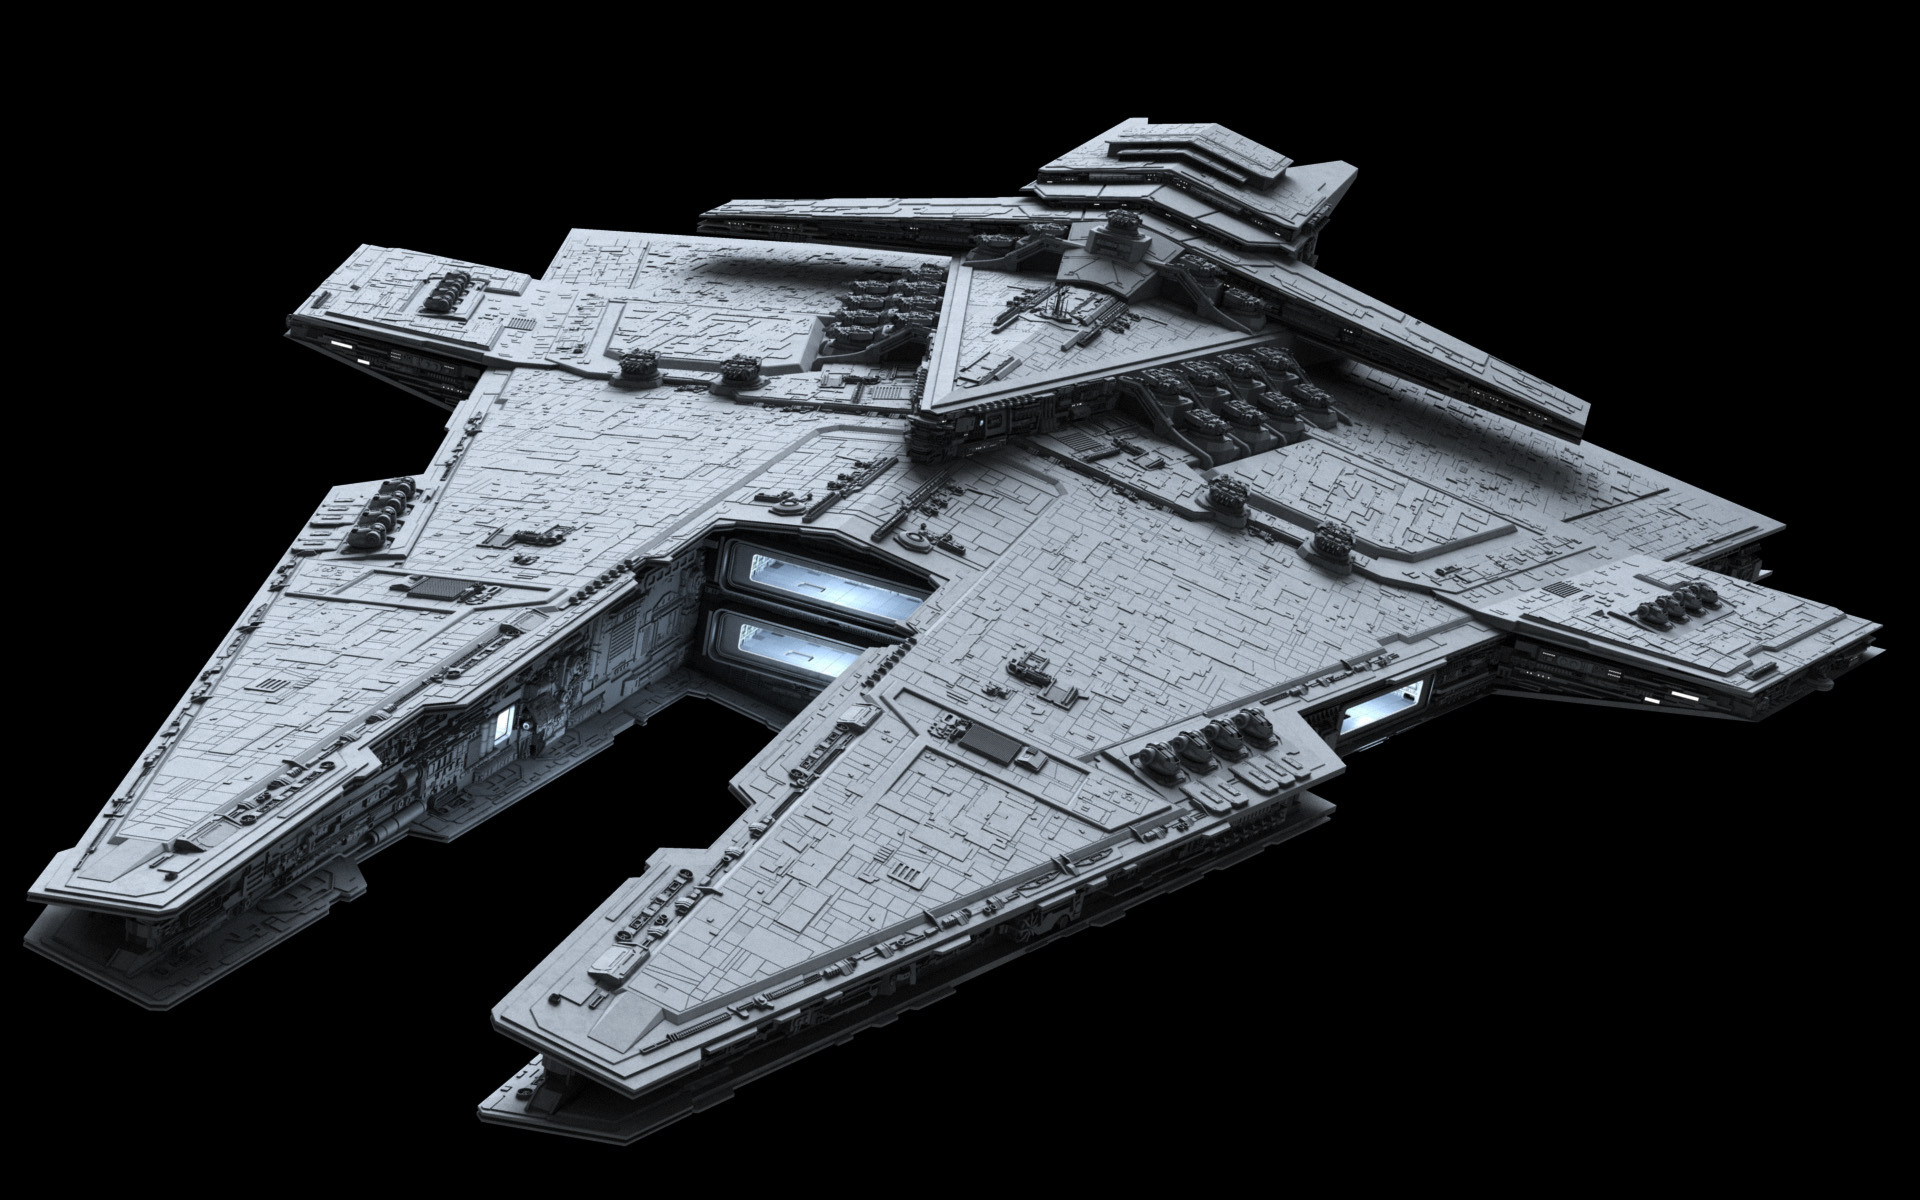 1920x1200 ILM star destroyer model from the movie set - Google Search